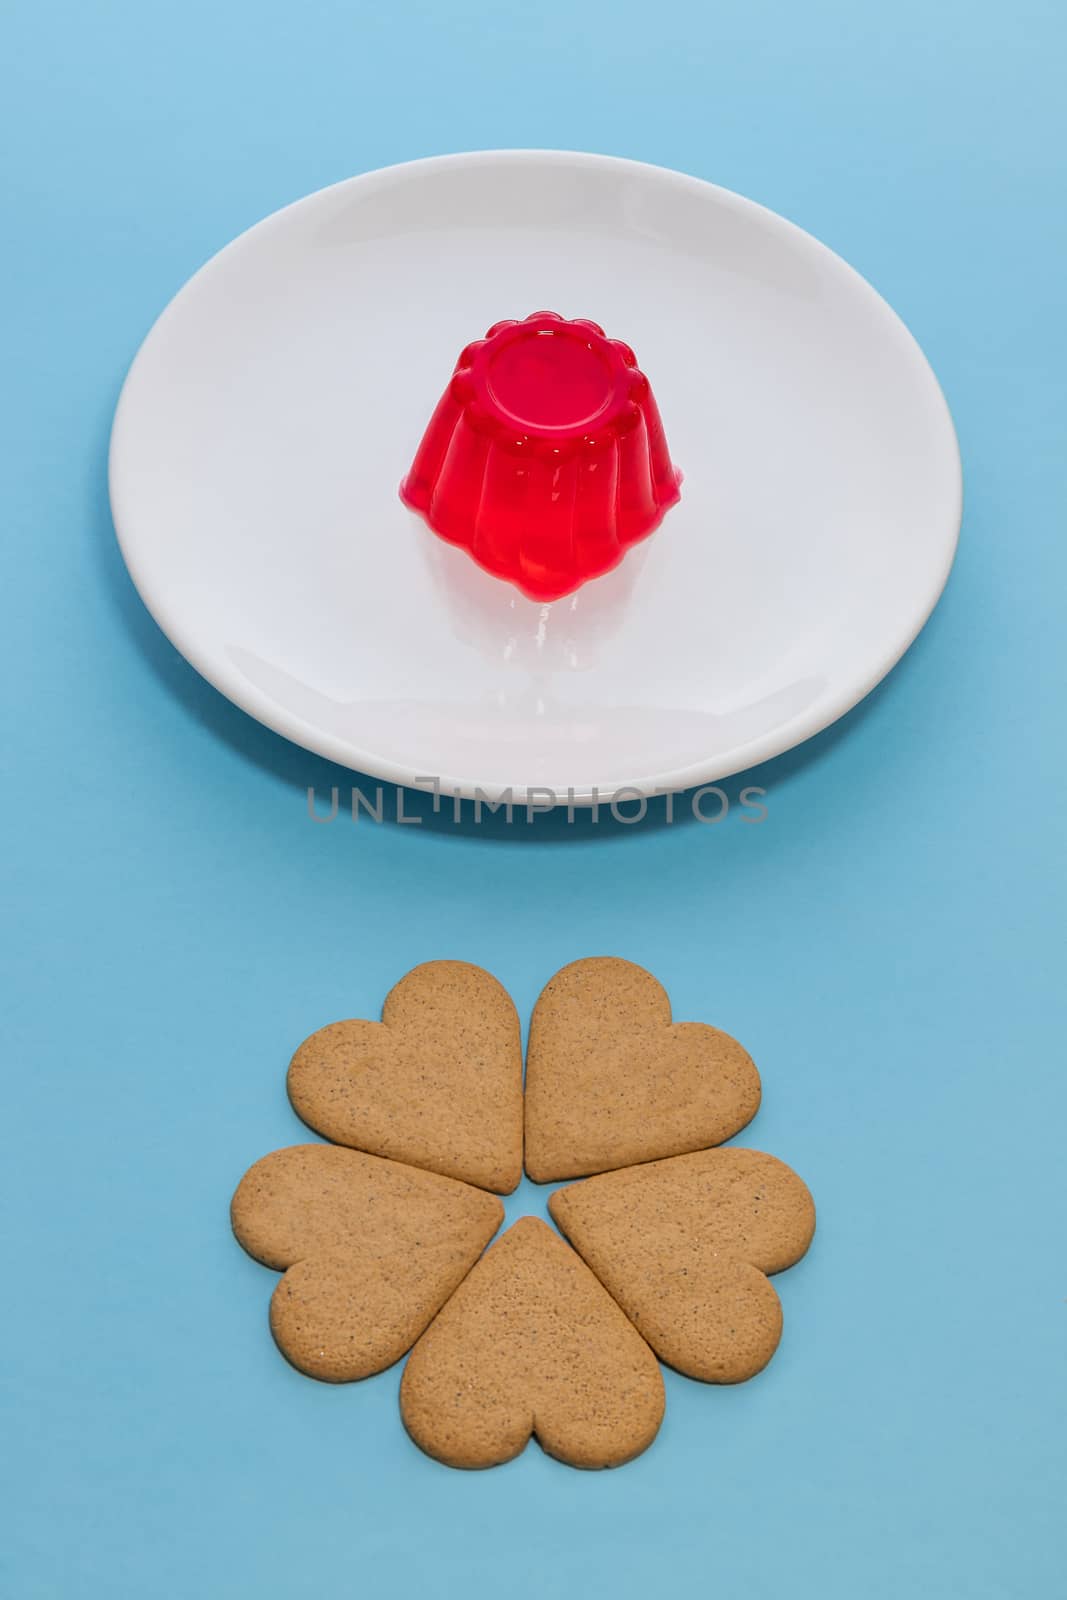 Close-up of a strawberry jelly dessert on a white plate. Heart-shaped cookies like a flower. Light blue background